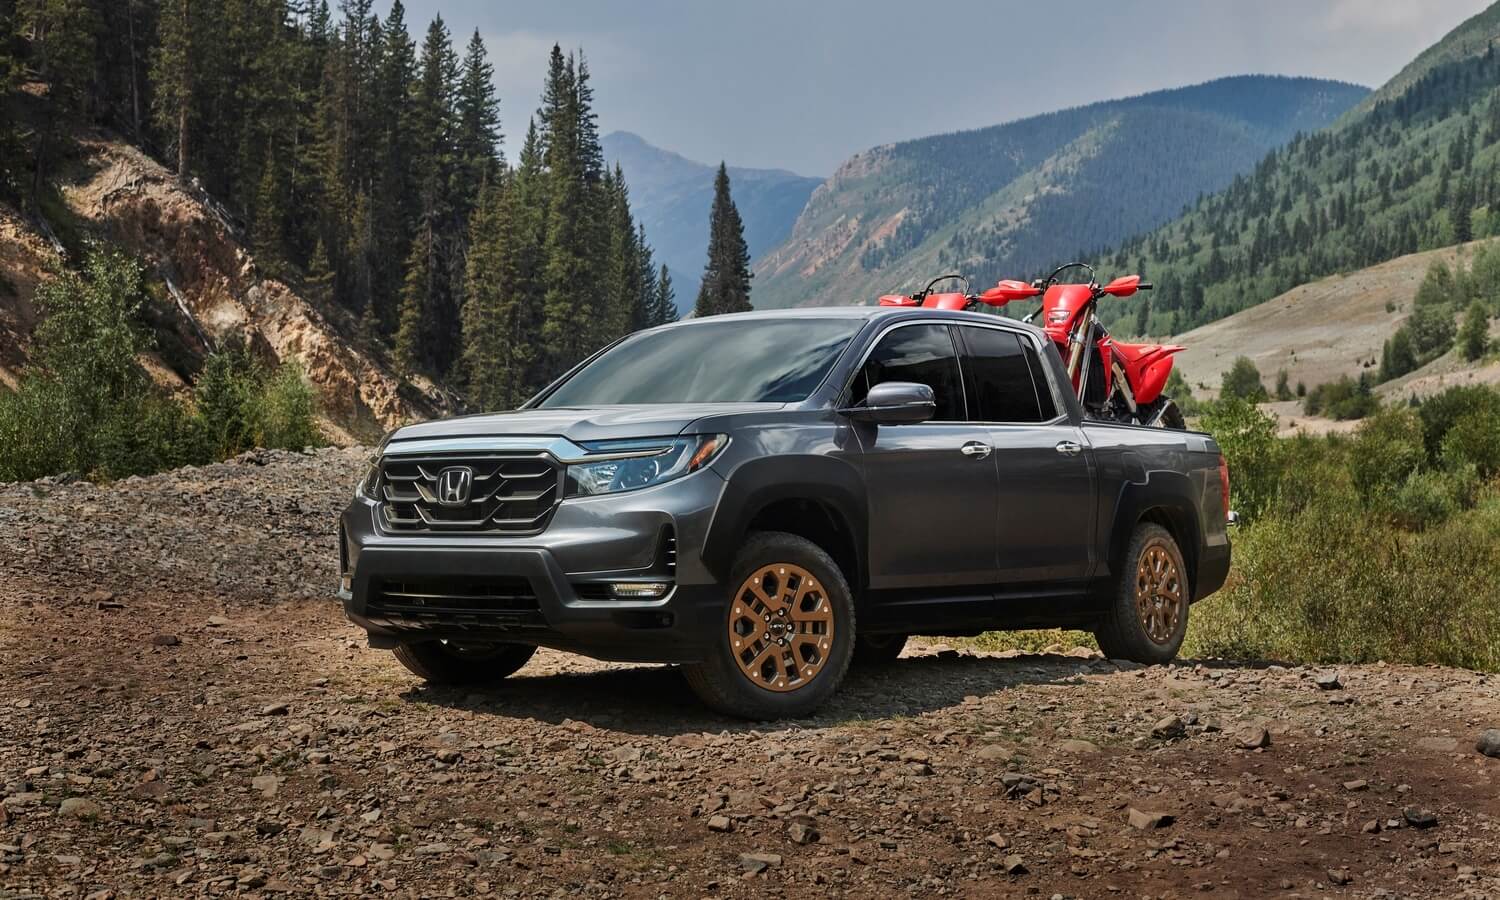 The 2023 Honda Ridgeline off-roading while carrying dirt bikes in the bed